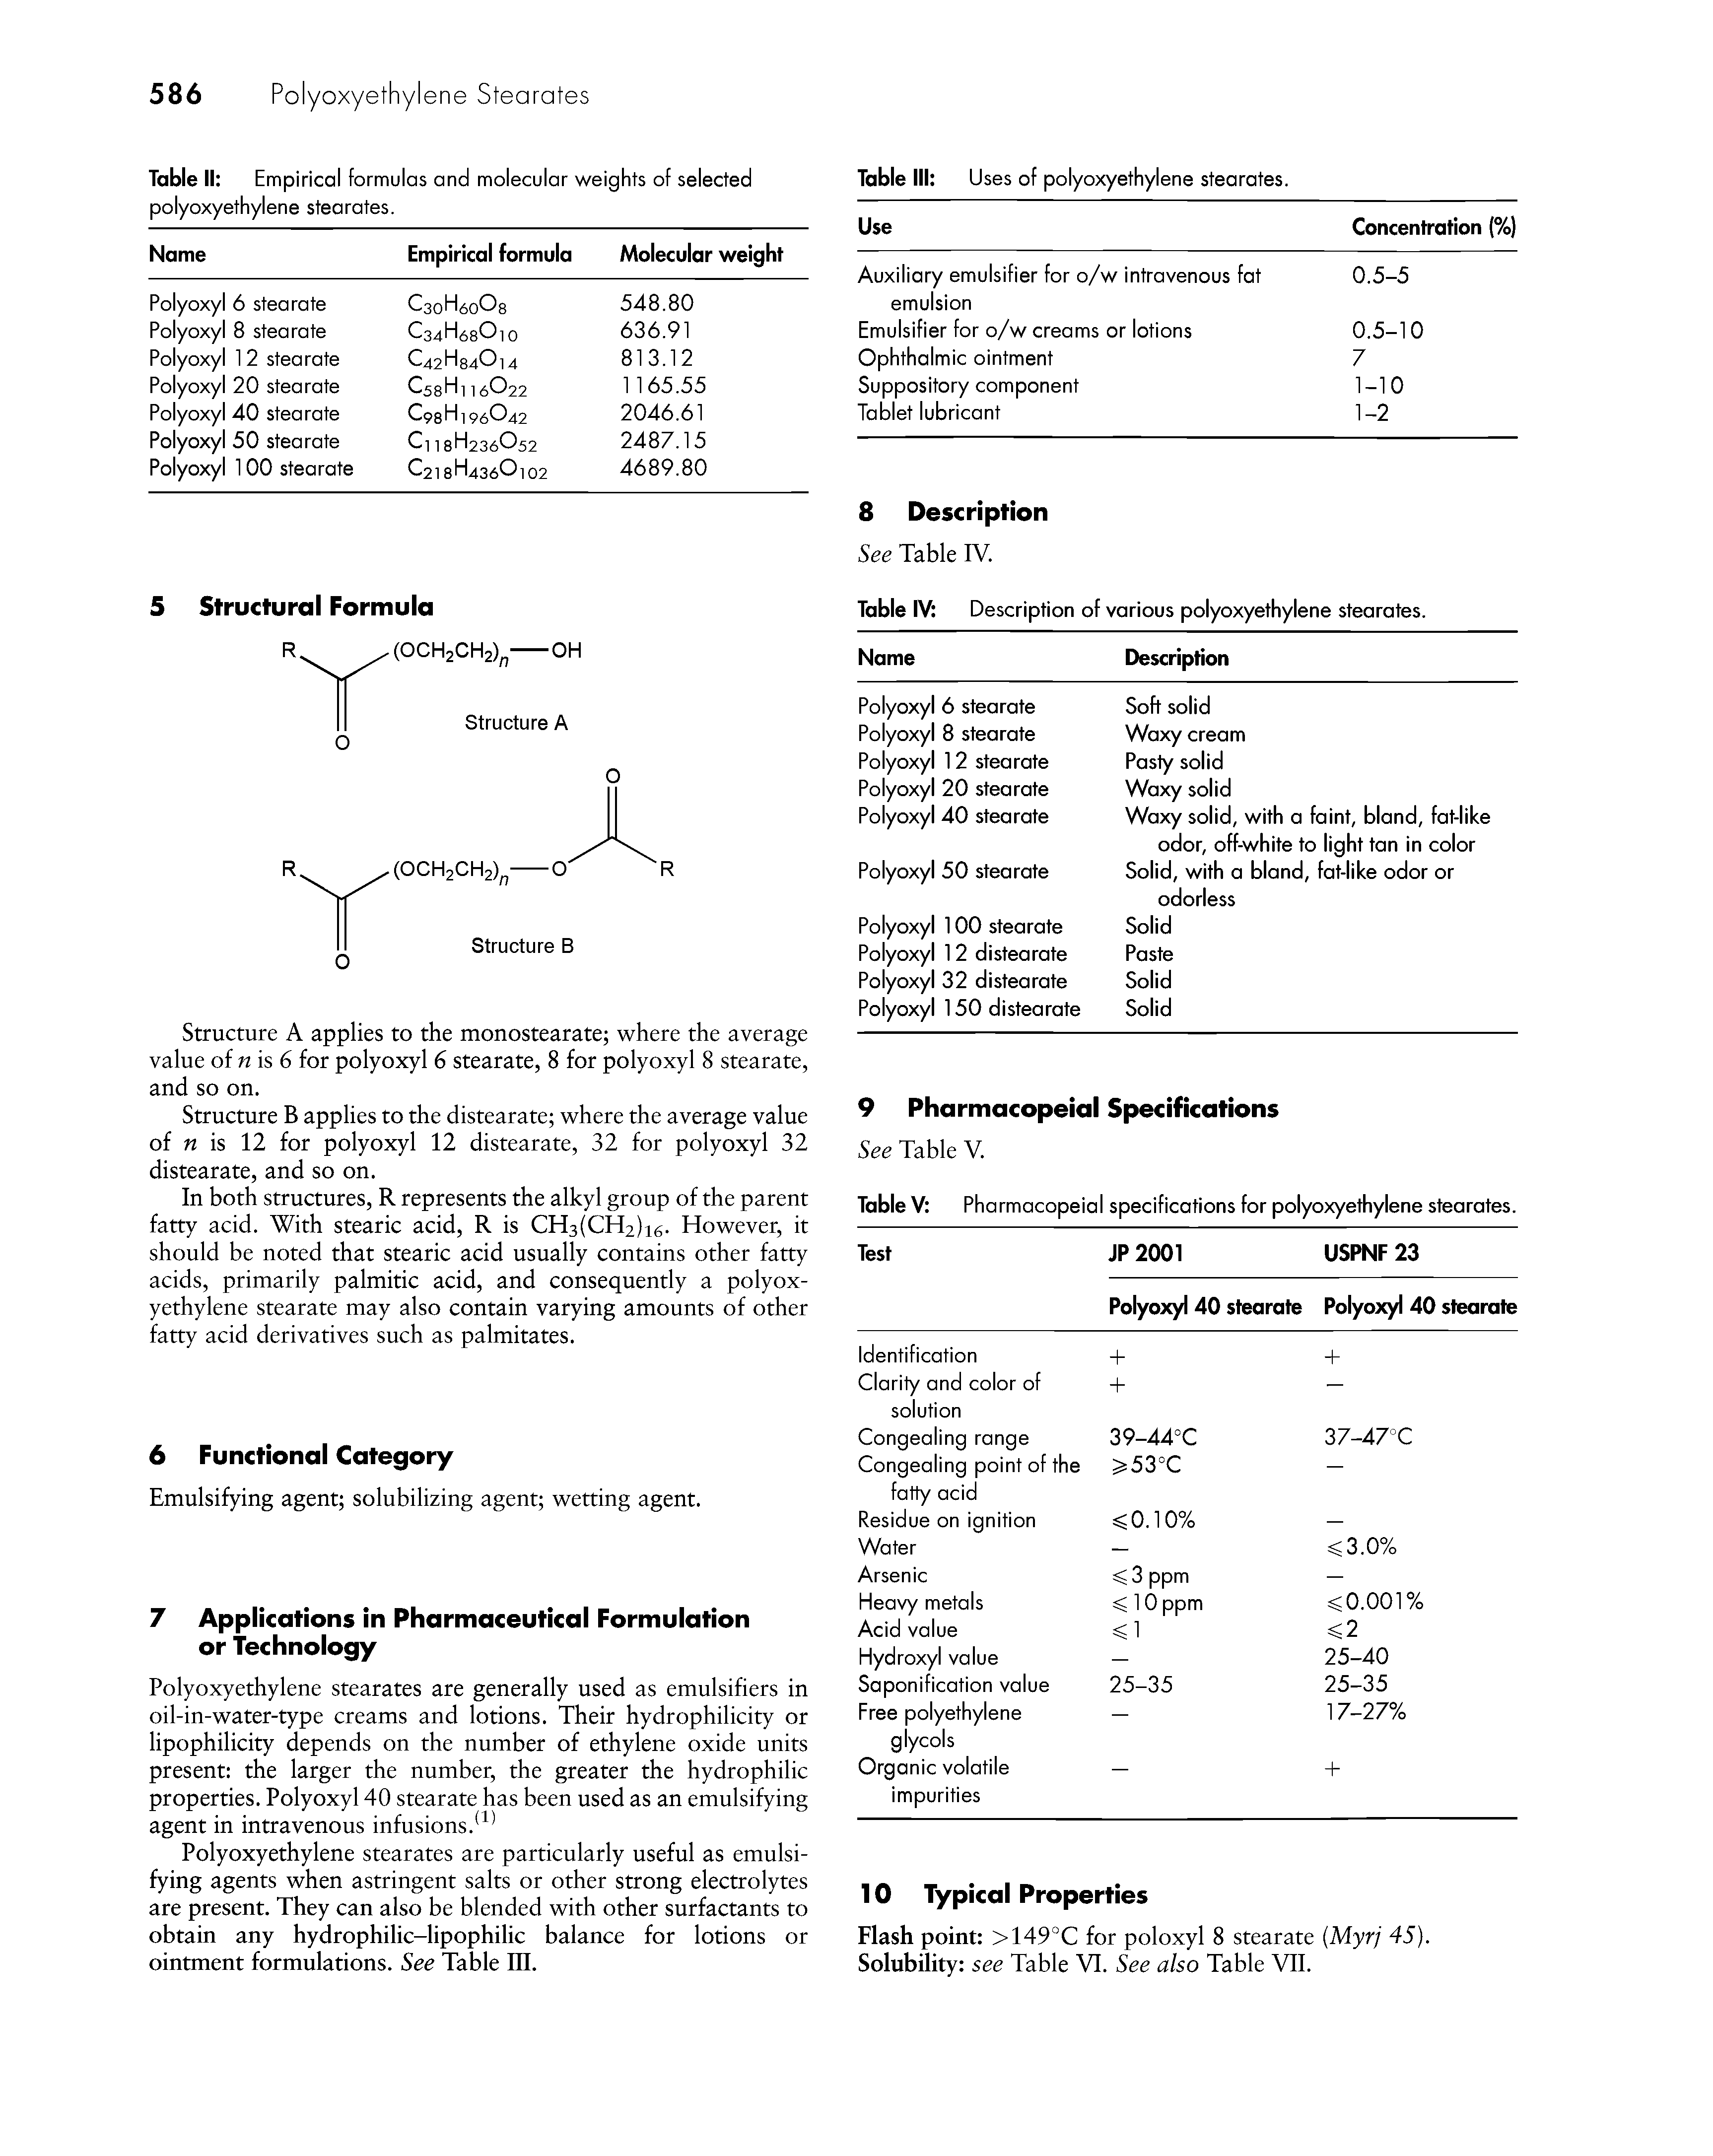 Table II Empirical formulas and molecular weights of selected polyoxyethylene stearates.